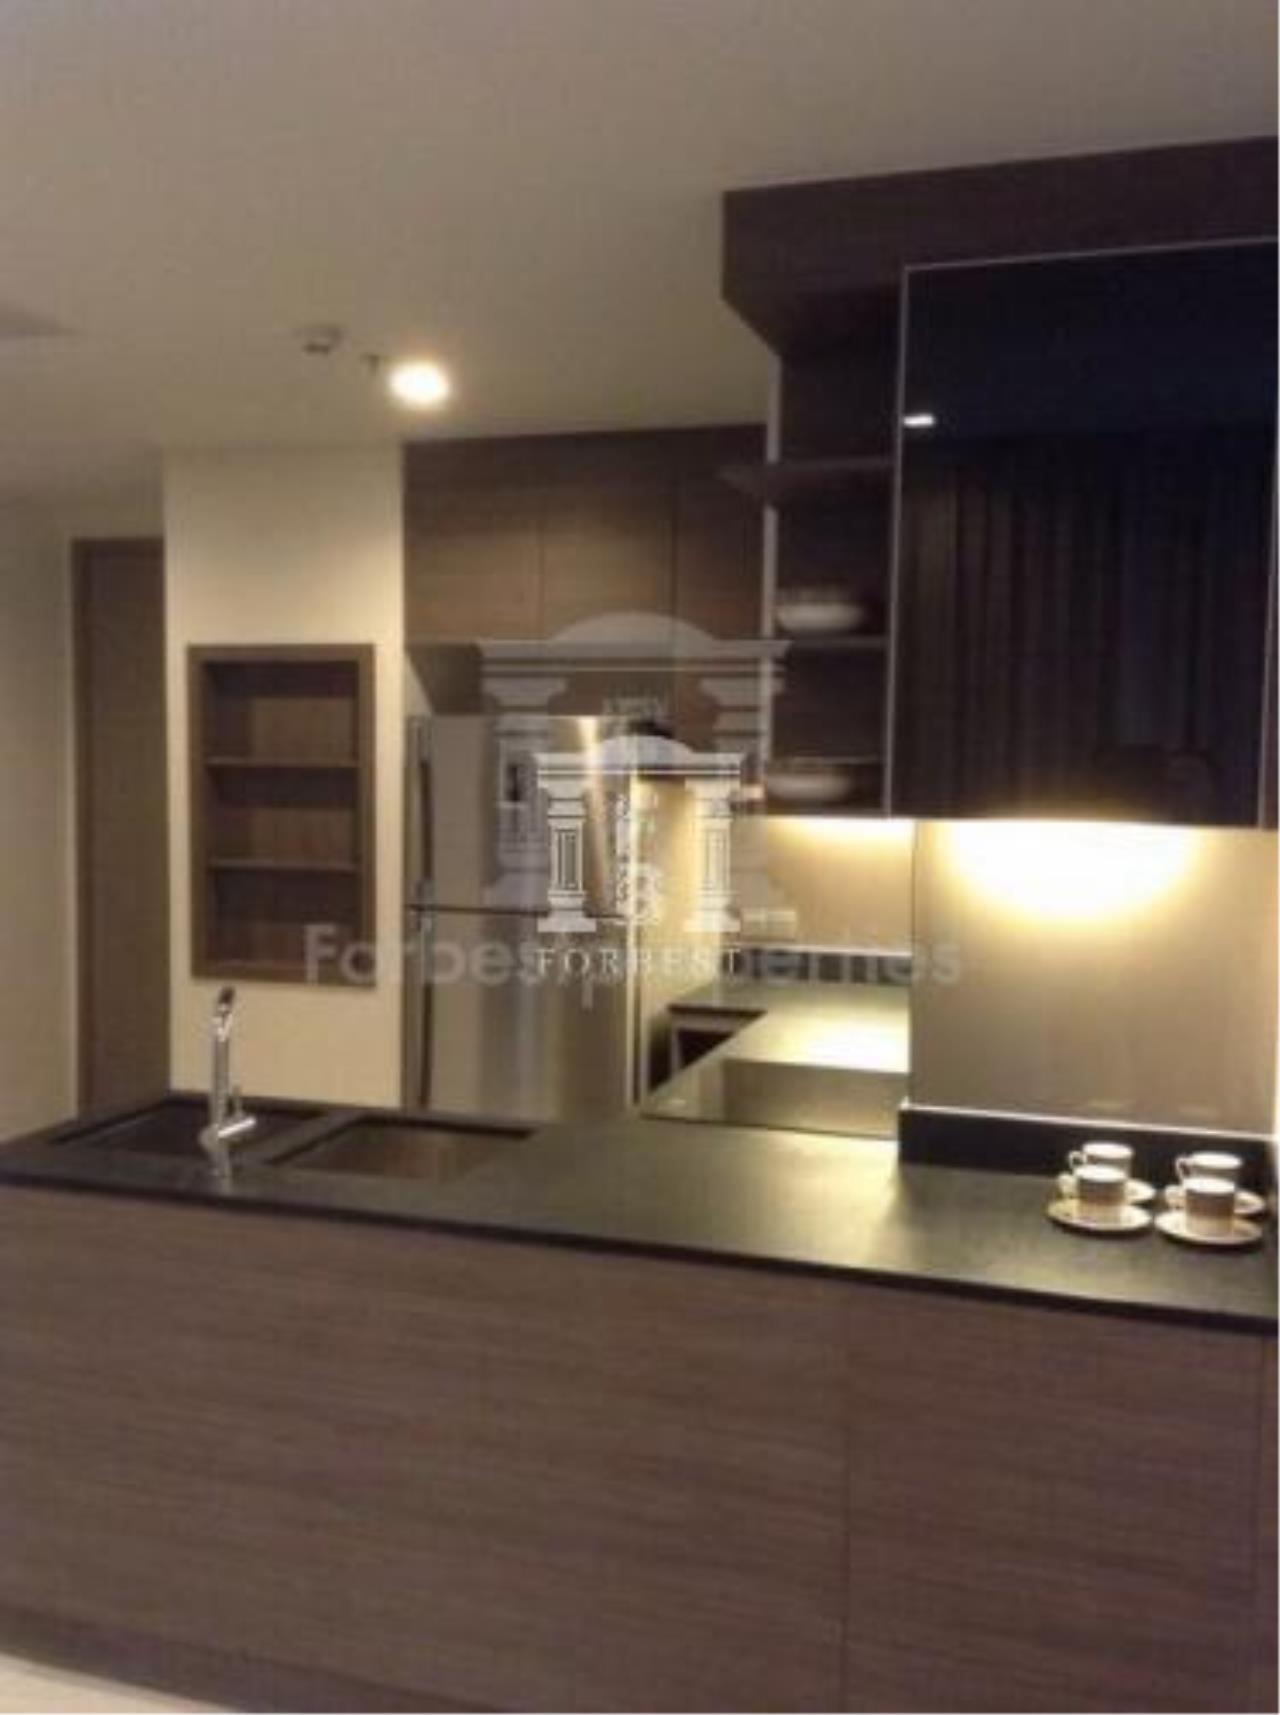 Forbest Properties Agency's 36136 - Condo for sale, 39 by Sansiri, area 56.31 sq.m. 4